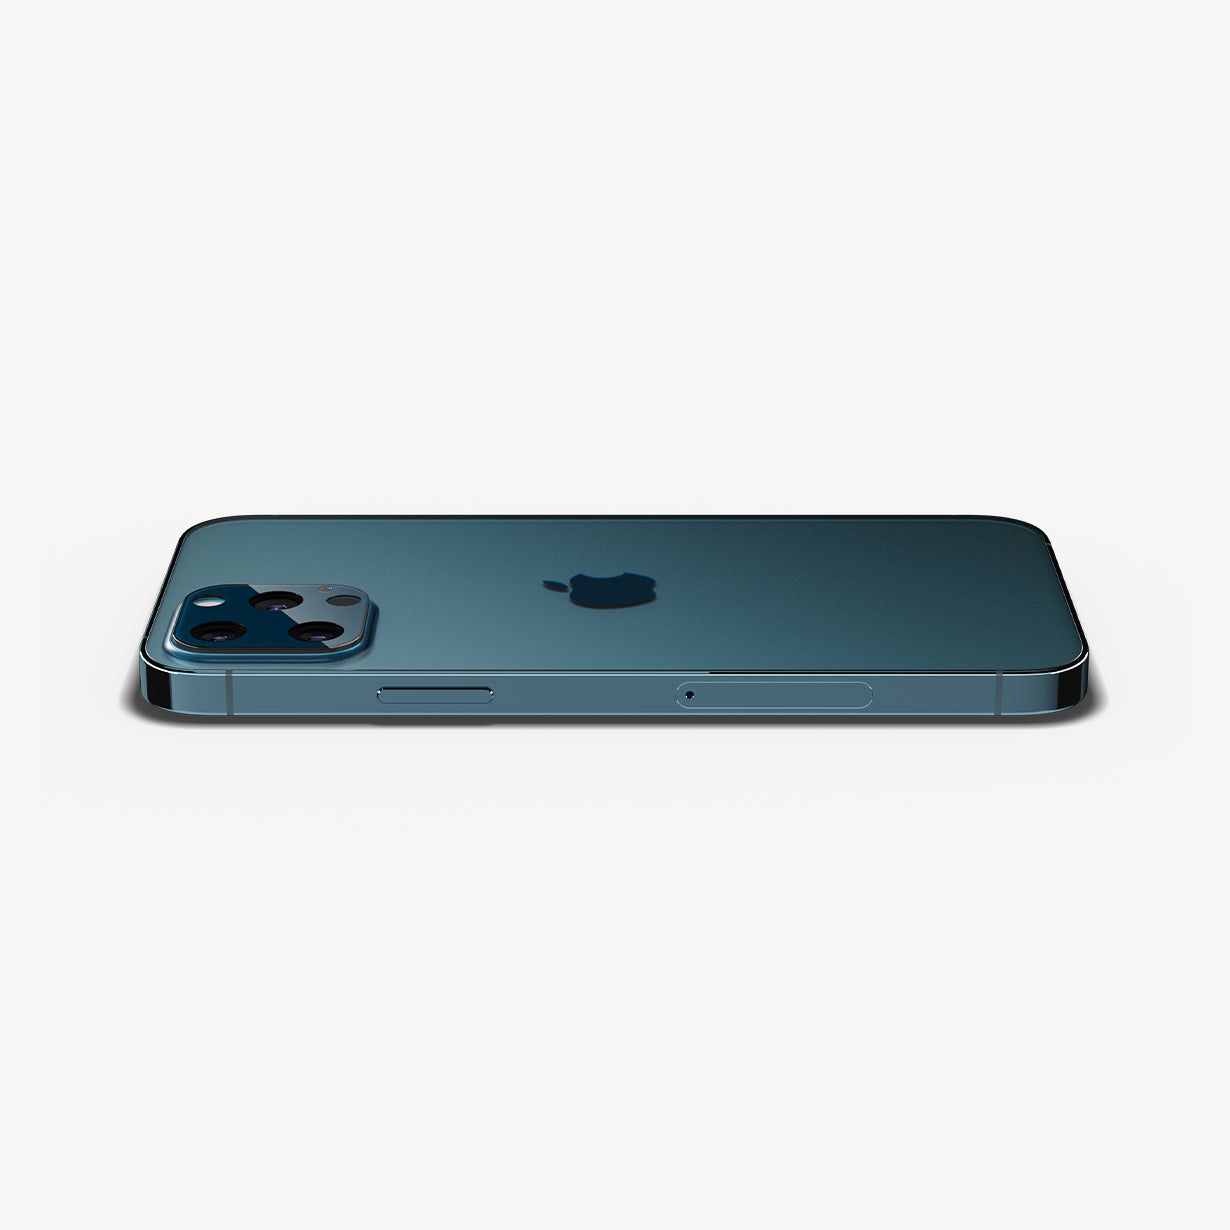 AGL02456 - iPhone 12 Pro Max Optik Lens Protector in Pacific Blue showing the back, partial side with lens protector installed